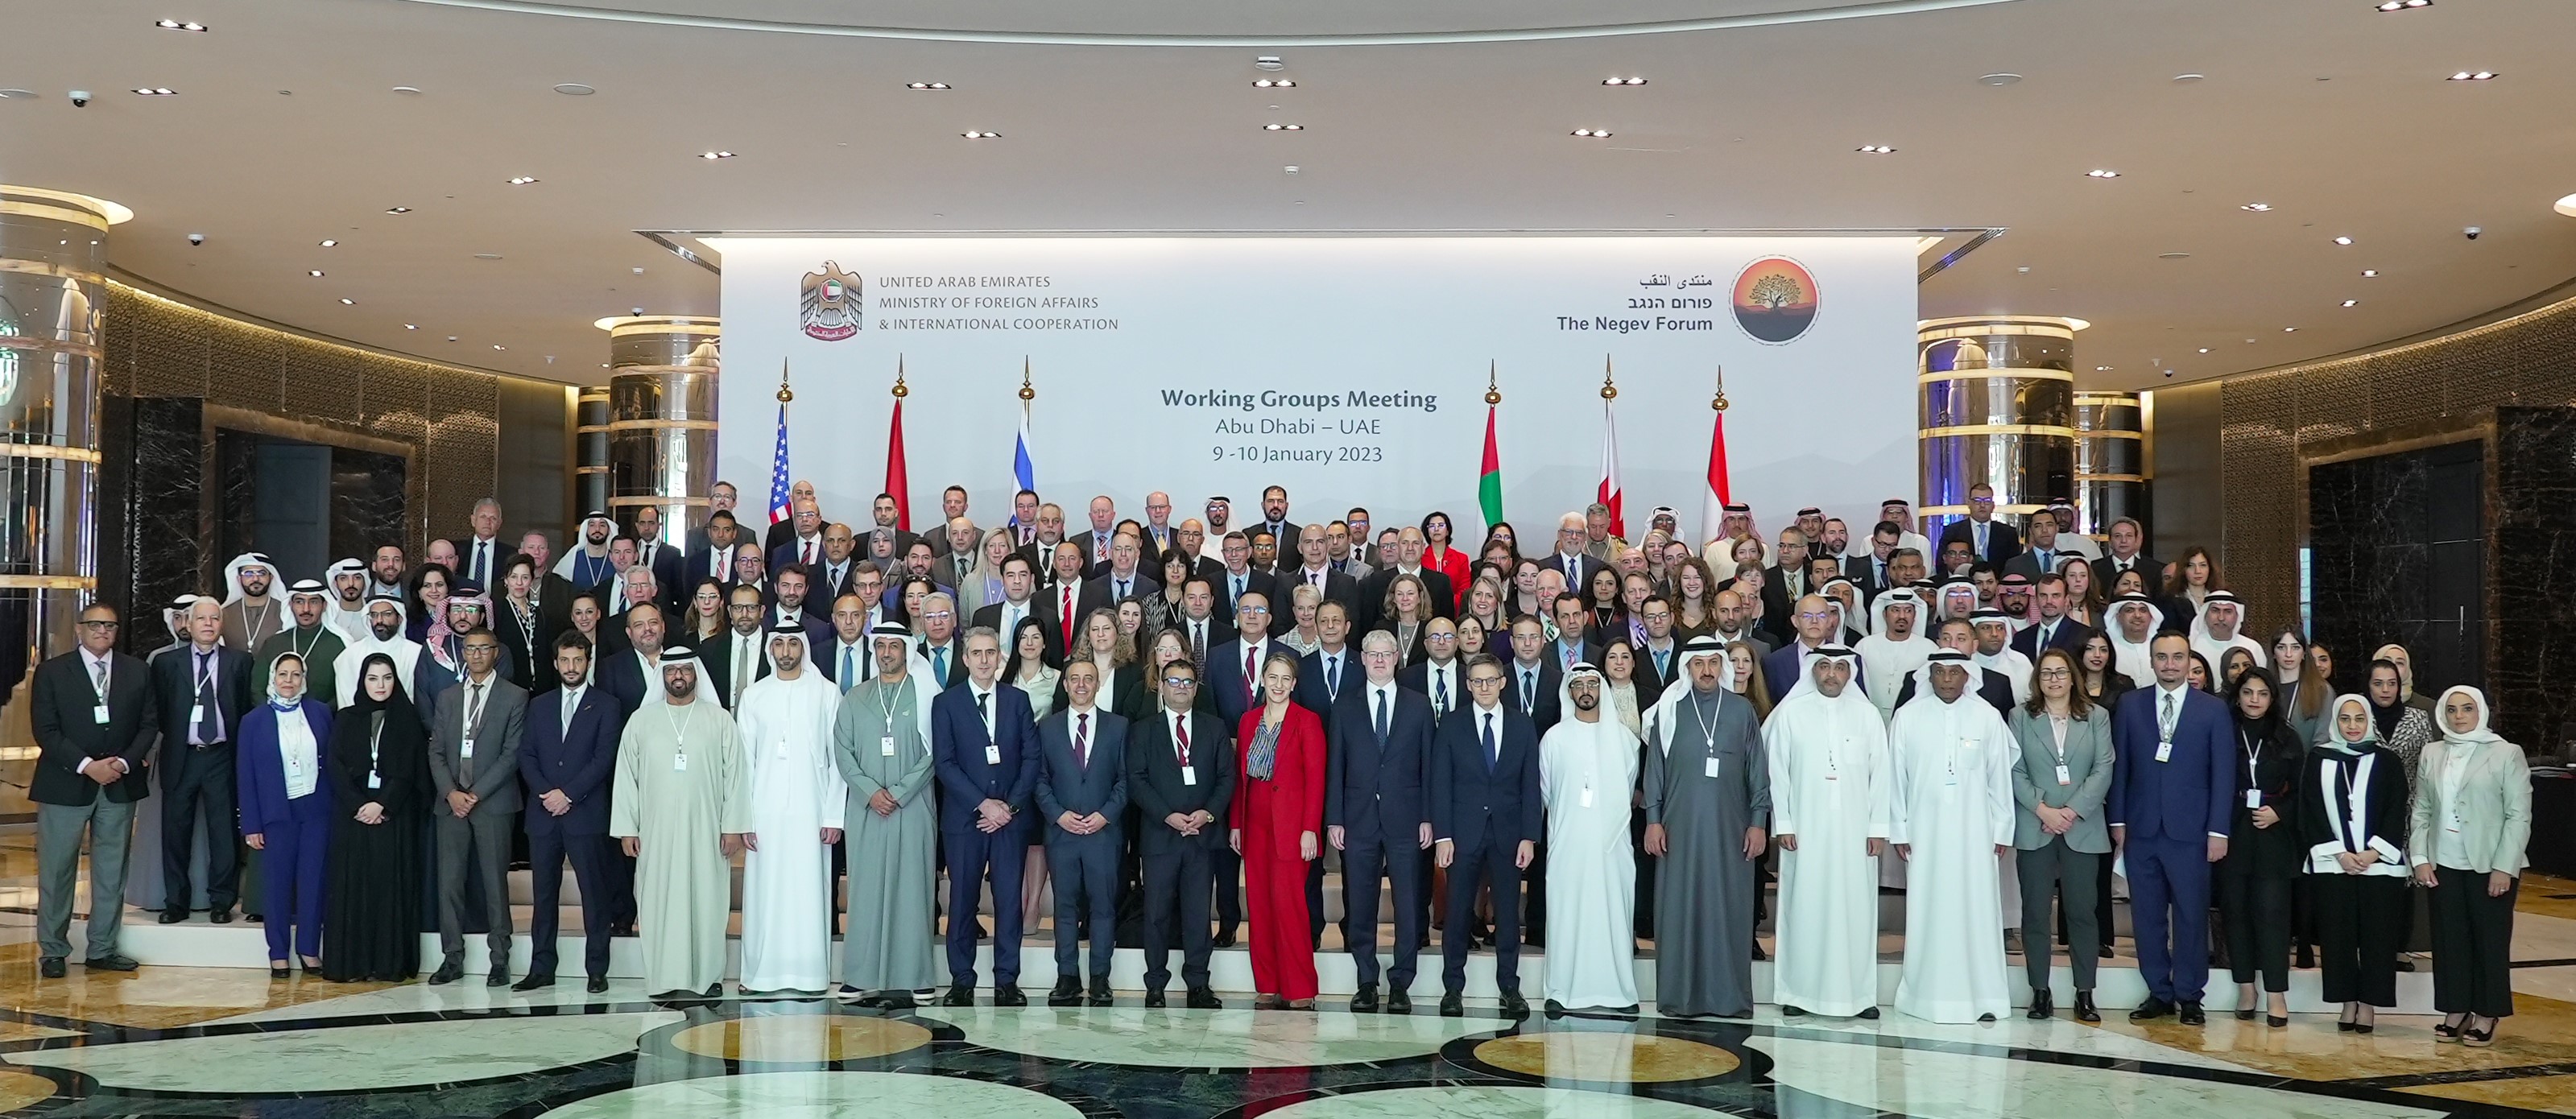 Members of the Negev Forum working groups in Abu Dhabi. Photo: Courtesy of the UAE Foreign Ministry.